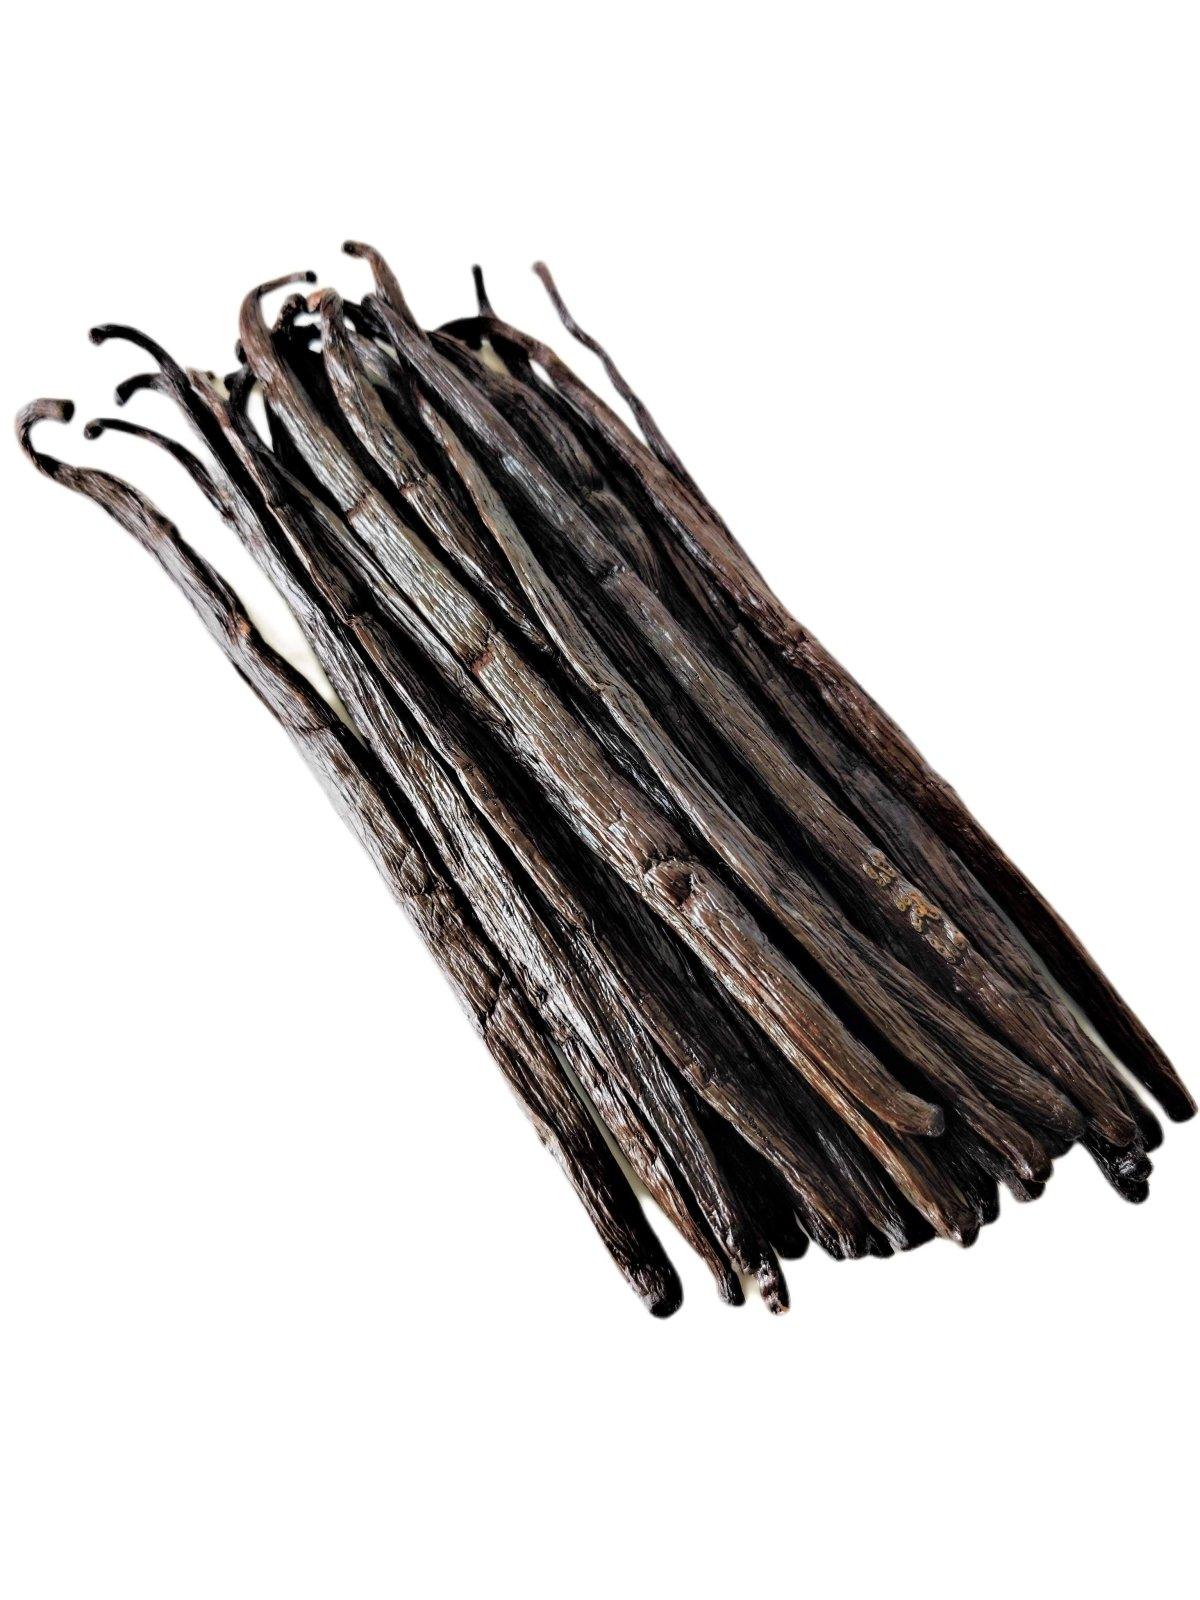 Madagascar Bourbon Vanilla Beans Gourmet Grade-A <br>For Extract And Baking<BR>5 count, 15 count, 25 count, 50 count, 100 count